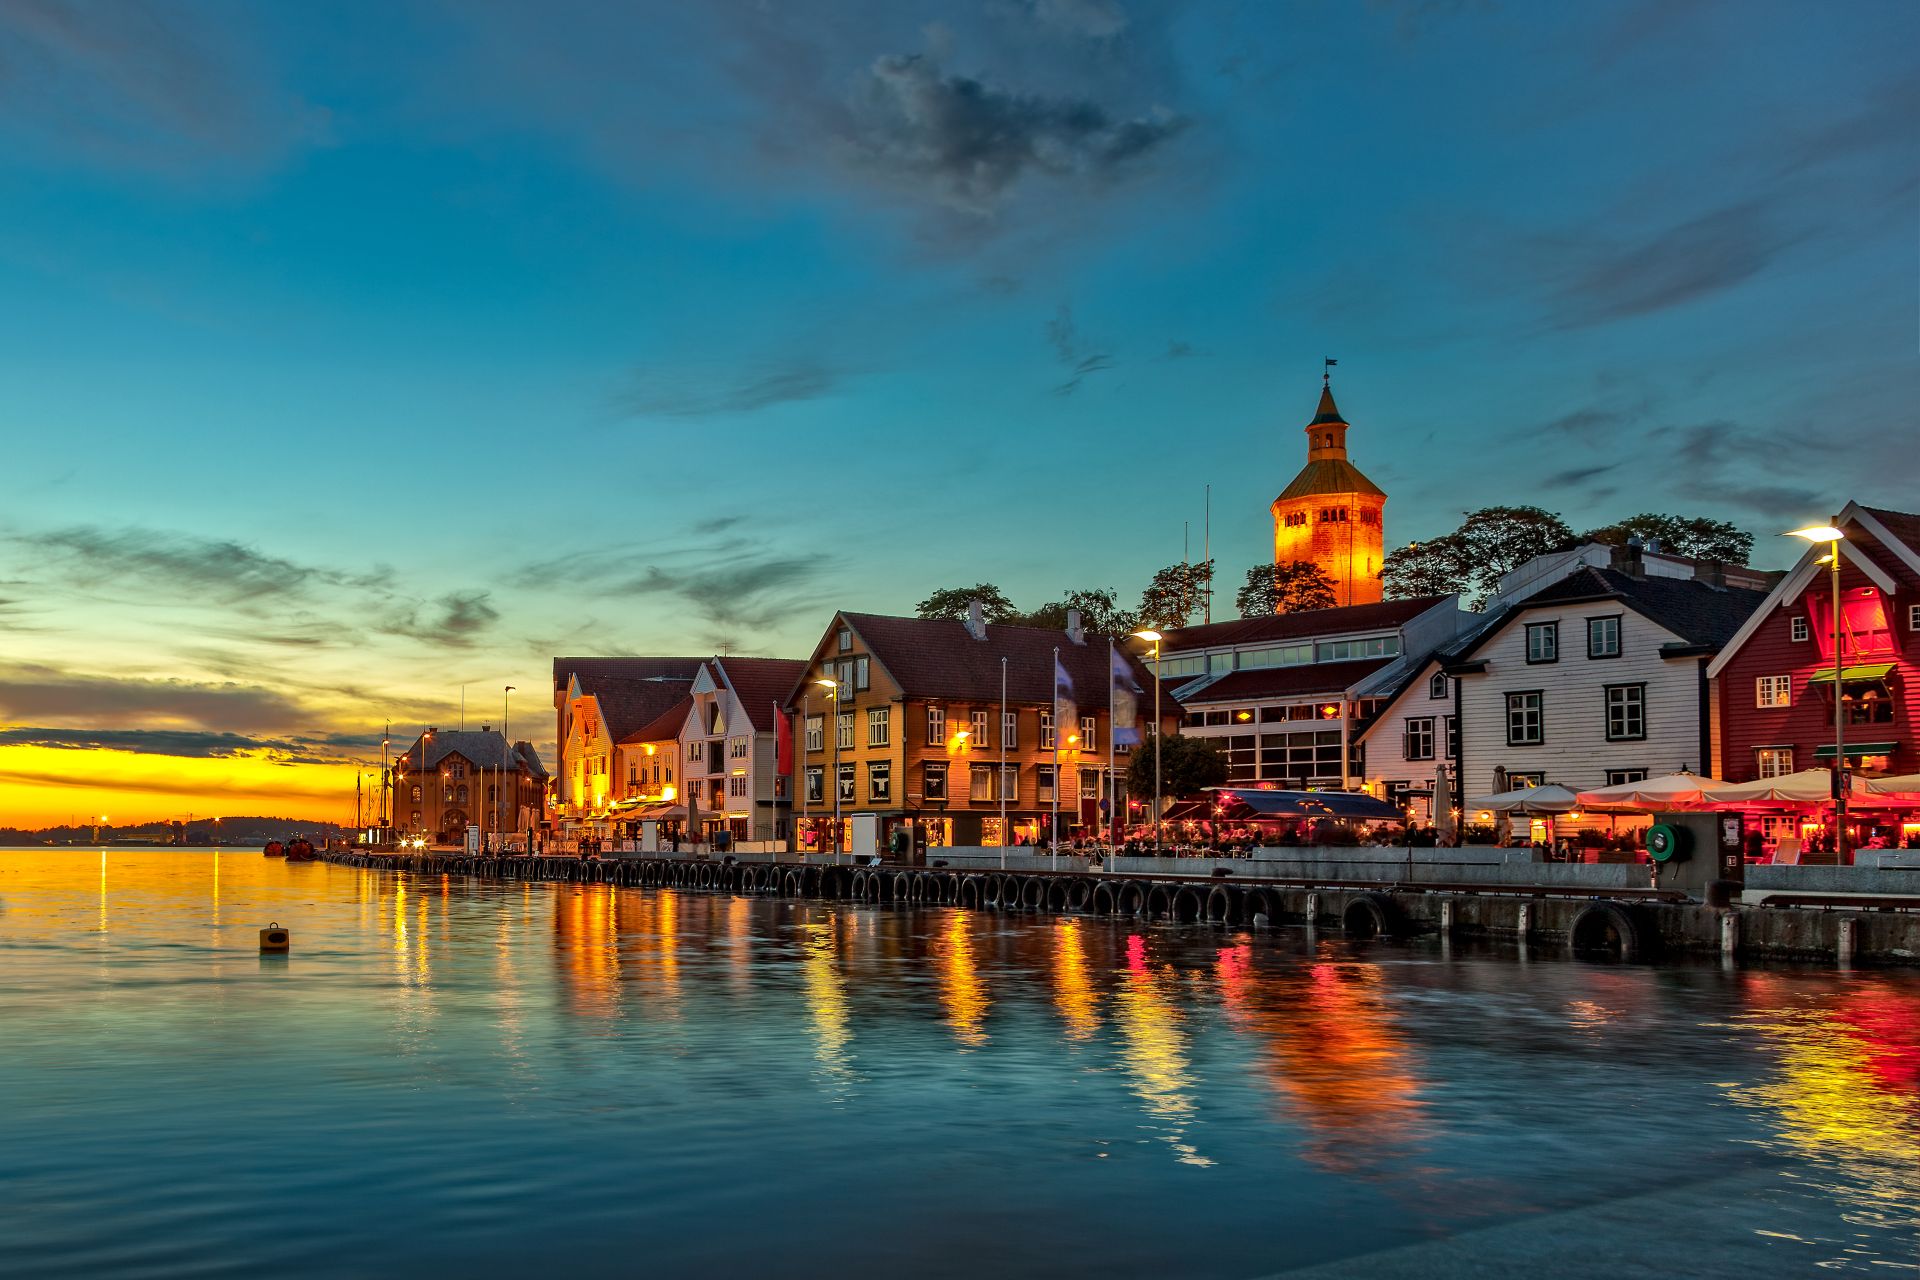 Stavanger at night - Charming town in Norway